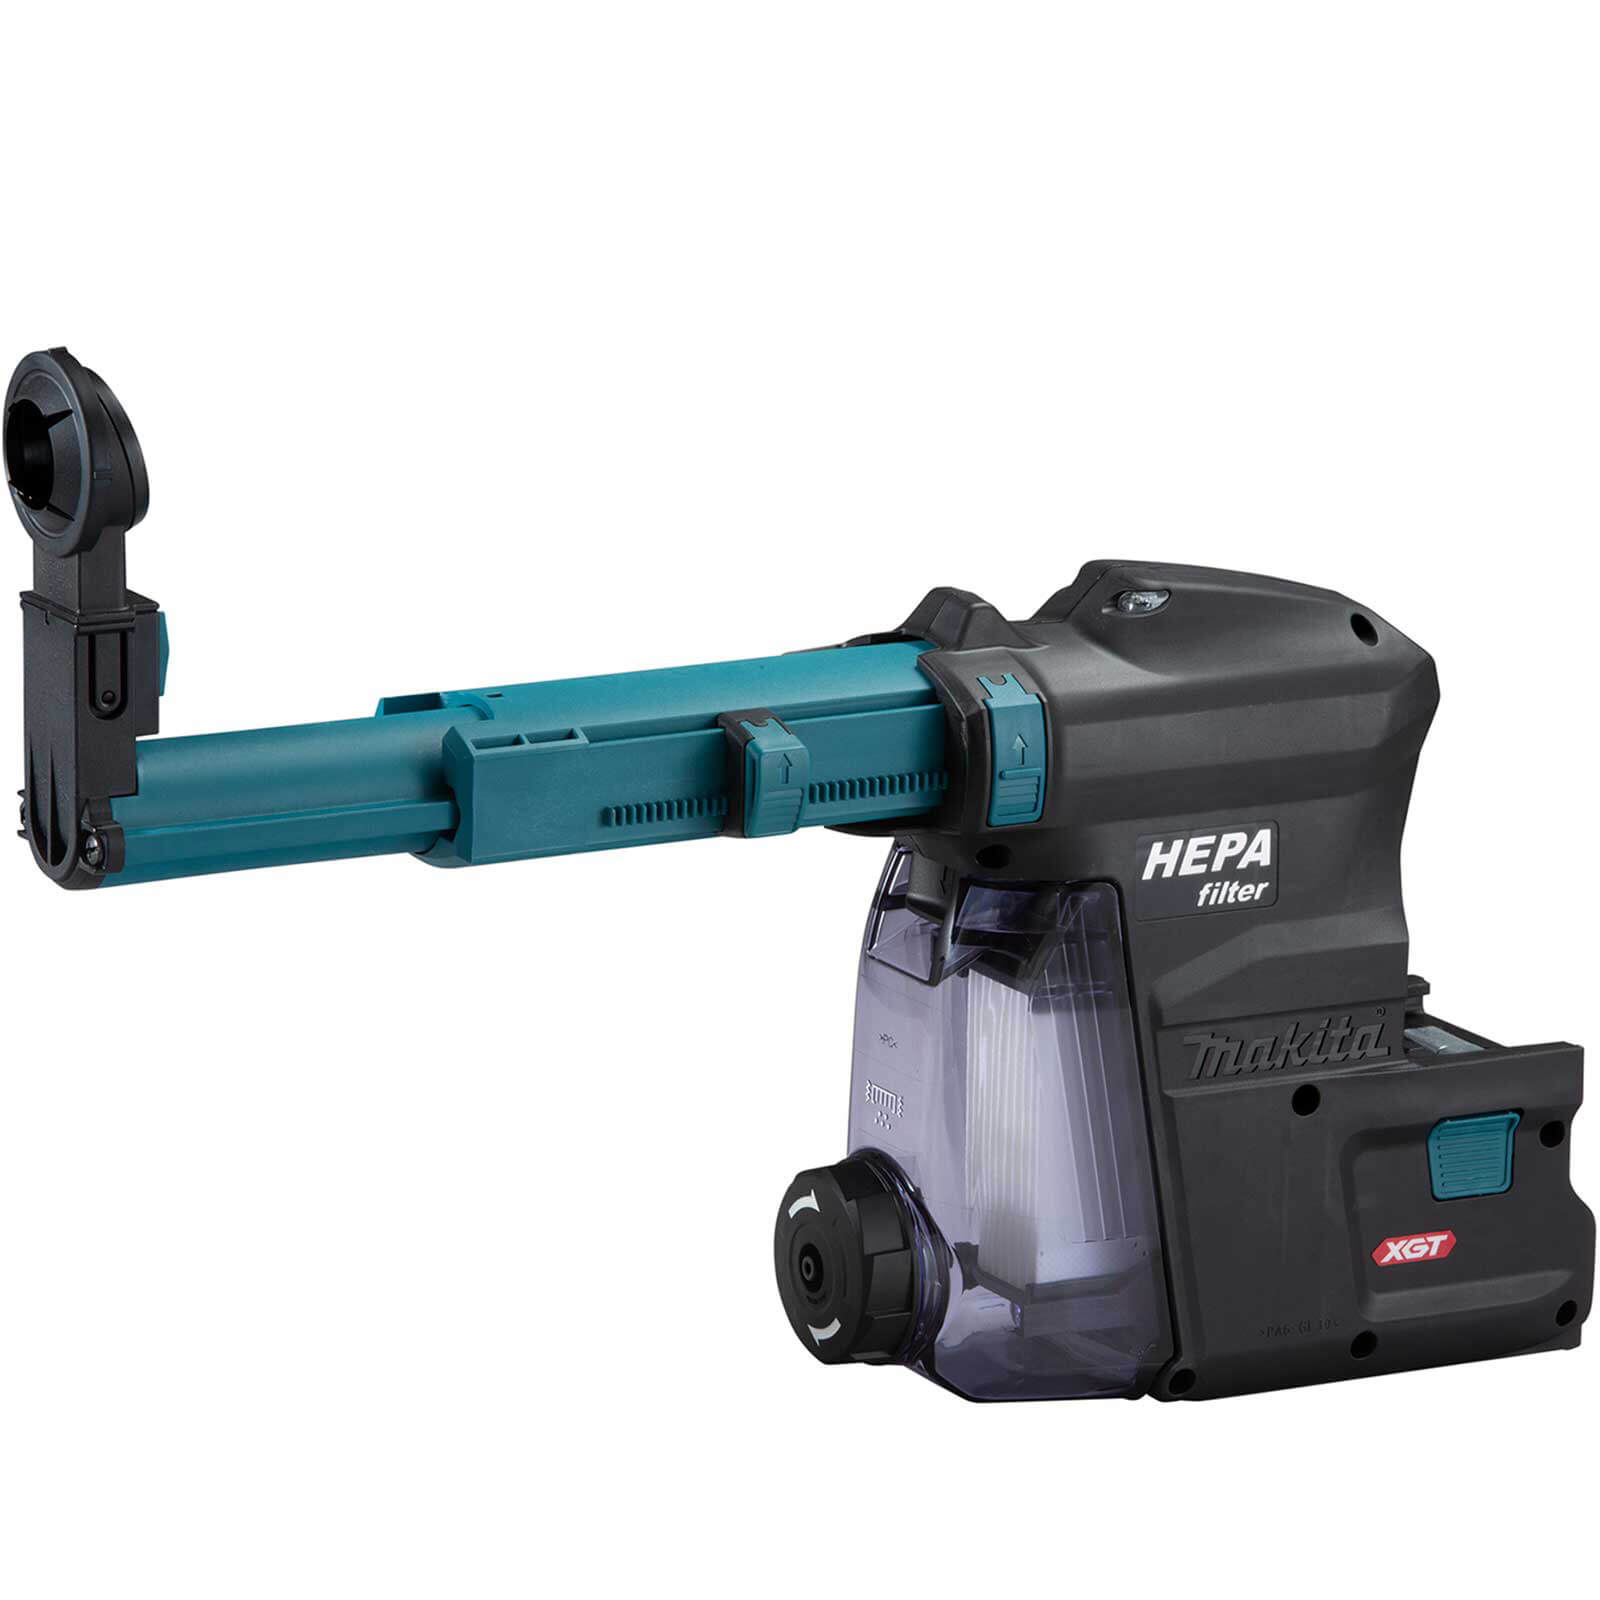 Image of Makita DX14 XGT Dust Extraction Attachment